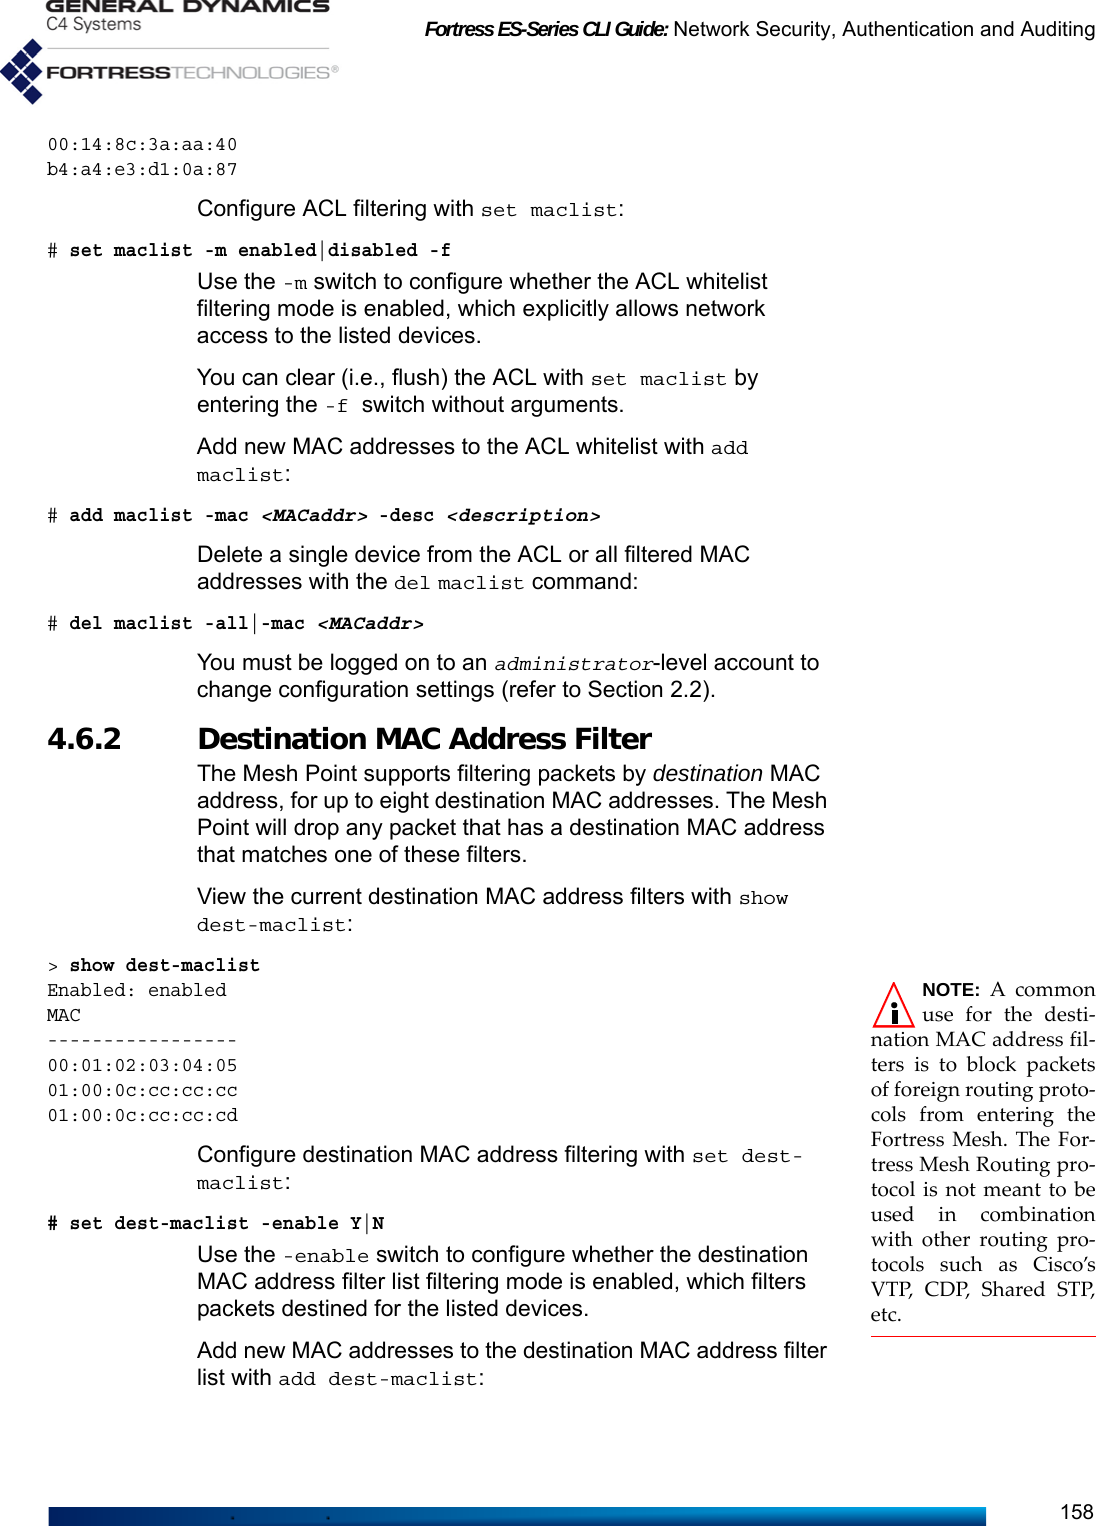 Fortress ES-Series CLI Guide: Network Security, Authentication and Auditing15800:14:8c:3a:aa:40b4:a4:e3:d1:0a:87Configure ACL filtering with set maclist:# set maclist -m enabled|disabled -fUse the -m switch to configure whether the ACL whitelist filtering mode is enabled, which explicitly allows network access to the listed devices.You can clear (i.e., flush) the ACL with set maclist by entering the -f switch without arguments.Add new MAC addresses to the ACL whitelist with add maclist:# add maclist -mac &lt;MACaddr&gt; -desc &lt;description&gt;Delete a single device from the ACL or all filtered MAC addresses with the del maclist command:# del maclist -all|-mac &lt;MACaddr&gt;You must be logged on to an administrator-level account to change configuration settings (refer to Section 2.2).4.6.2 Destination MAC Address Filter The Mesh Point supports filtering packets by destination MAC address, for up to eight destination MAC addresses. The Mesh Point will drop any packet that has a destination MAC address that matches one of these filters.View the current destination MAC address filters with show dest-maclist:&gt; show dest-maclistNOTE: A commonuse for the desti-nation MAC address fil-ters is to block packetsof foreign routing proto-cols from entering theFortress Mesh. The For-tress Mesh Routing pro-tocol is not meant to beused in combinationwith other routing pro-tocols such as Cisco’sV T P,  C D P, S h a re d  S T P,etc.Enabled: enabledMAC-----------------00:01:02:03:04:0501:00:0c:cc:cc:cc01:00:0c:cc:cc:cd Configure destination MAC address filtering with set dest-maclist:# set dest-maclist -enable Y|NUse the -enable switch to configure whether the destination MAC address filter list filtering mode is enabled, which filters packets destined for the listed devices.Add new MAC addresses to the destination MAC address filter list with add dest-maclist: